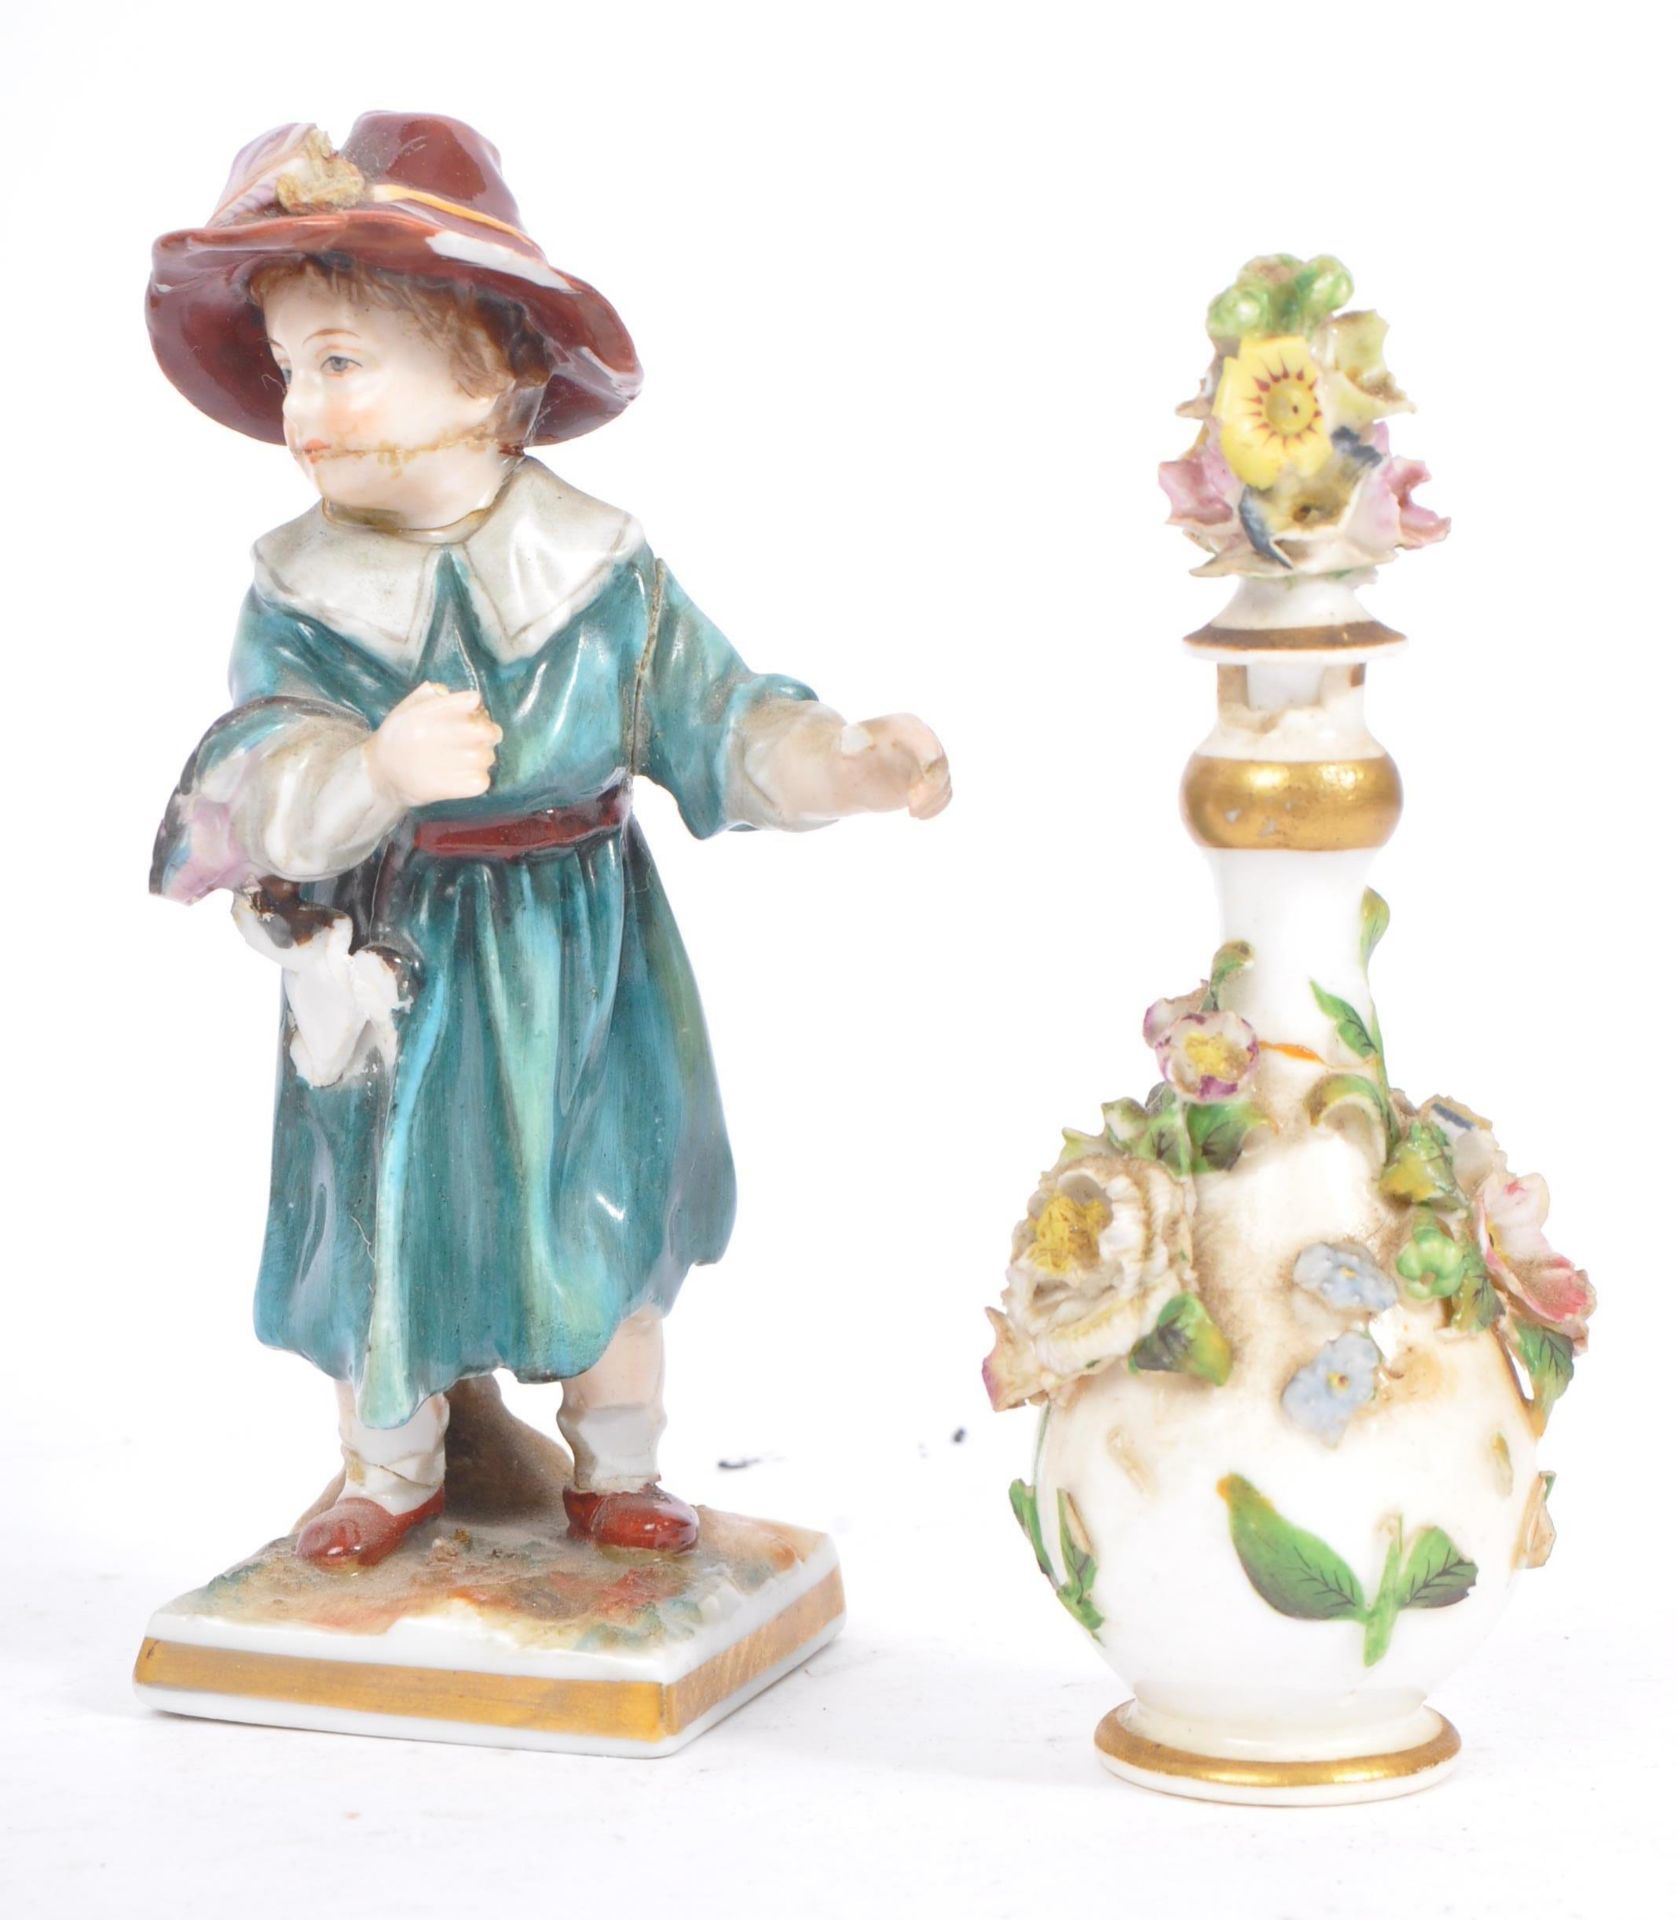 CAPODIMONTE - COLLECTION OF 19TH CENTURY PORCELAIN FIGURES - Image 7 of 11